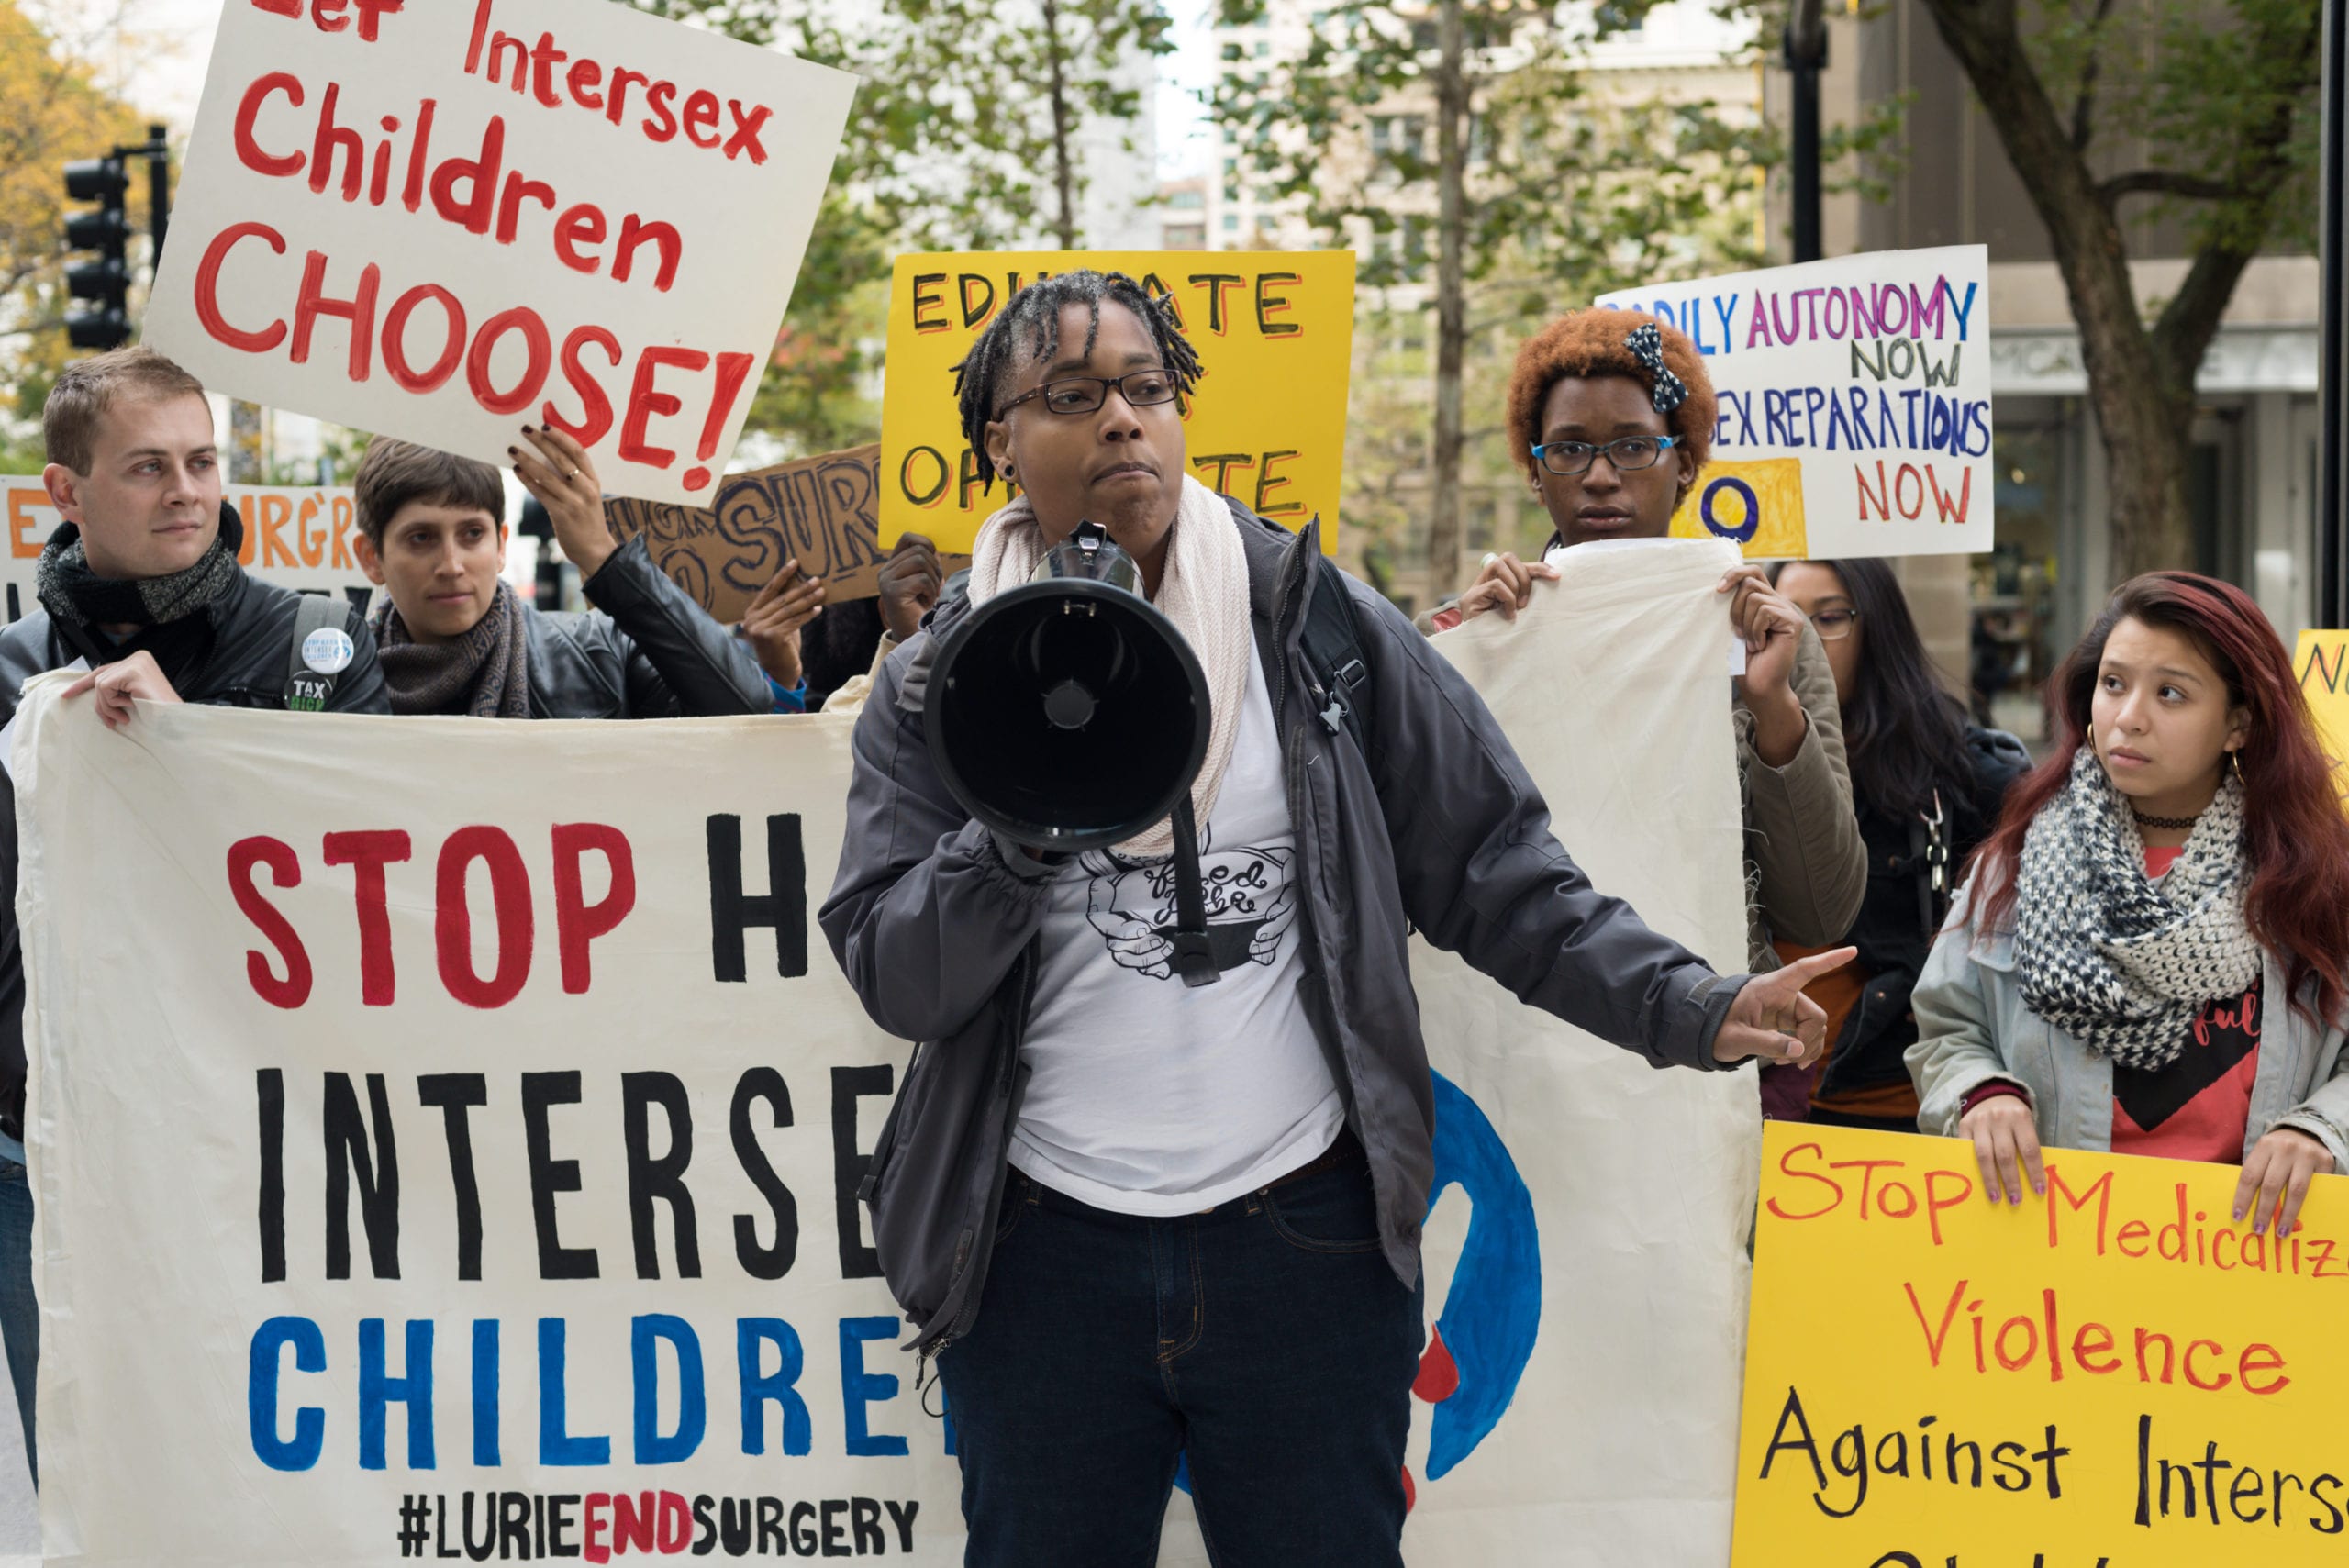 A person stands with a megaphone at a protest against intersex surgeries.